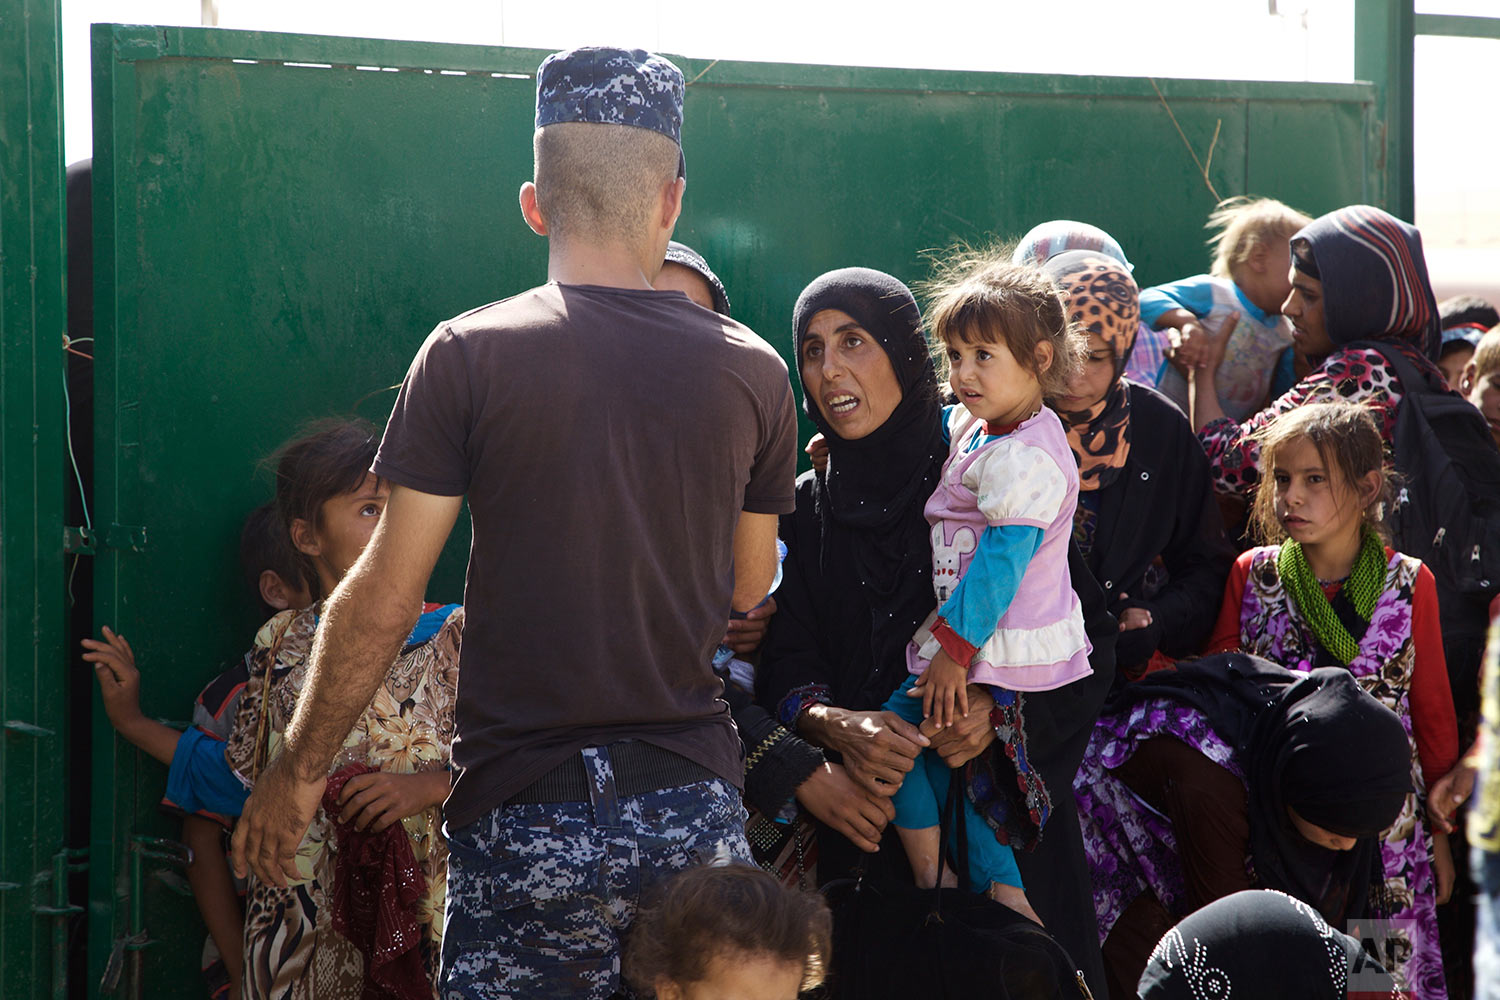  An Iraqi policeman gestures at a group of displaced women and children at a collection point west of Mosul on the outskirts of Tal Afar, Iraq, Saturday, Aug. 26, 2017. The Iraqi military said on Saturday that they had taken 90 percent of the town, o